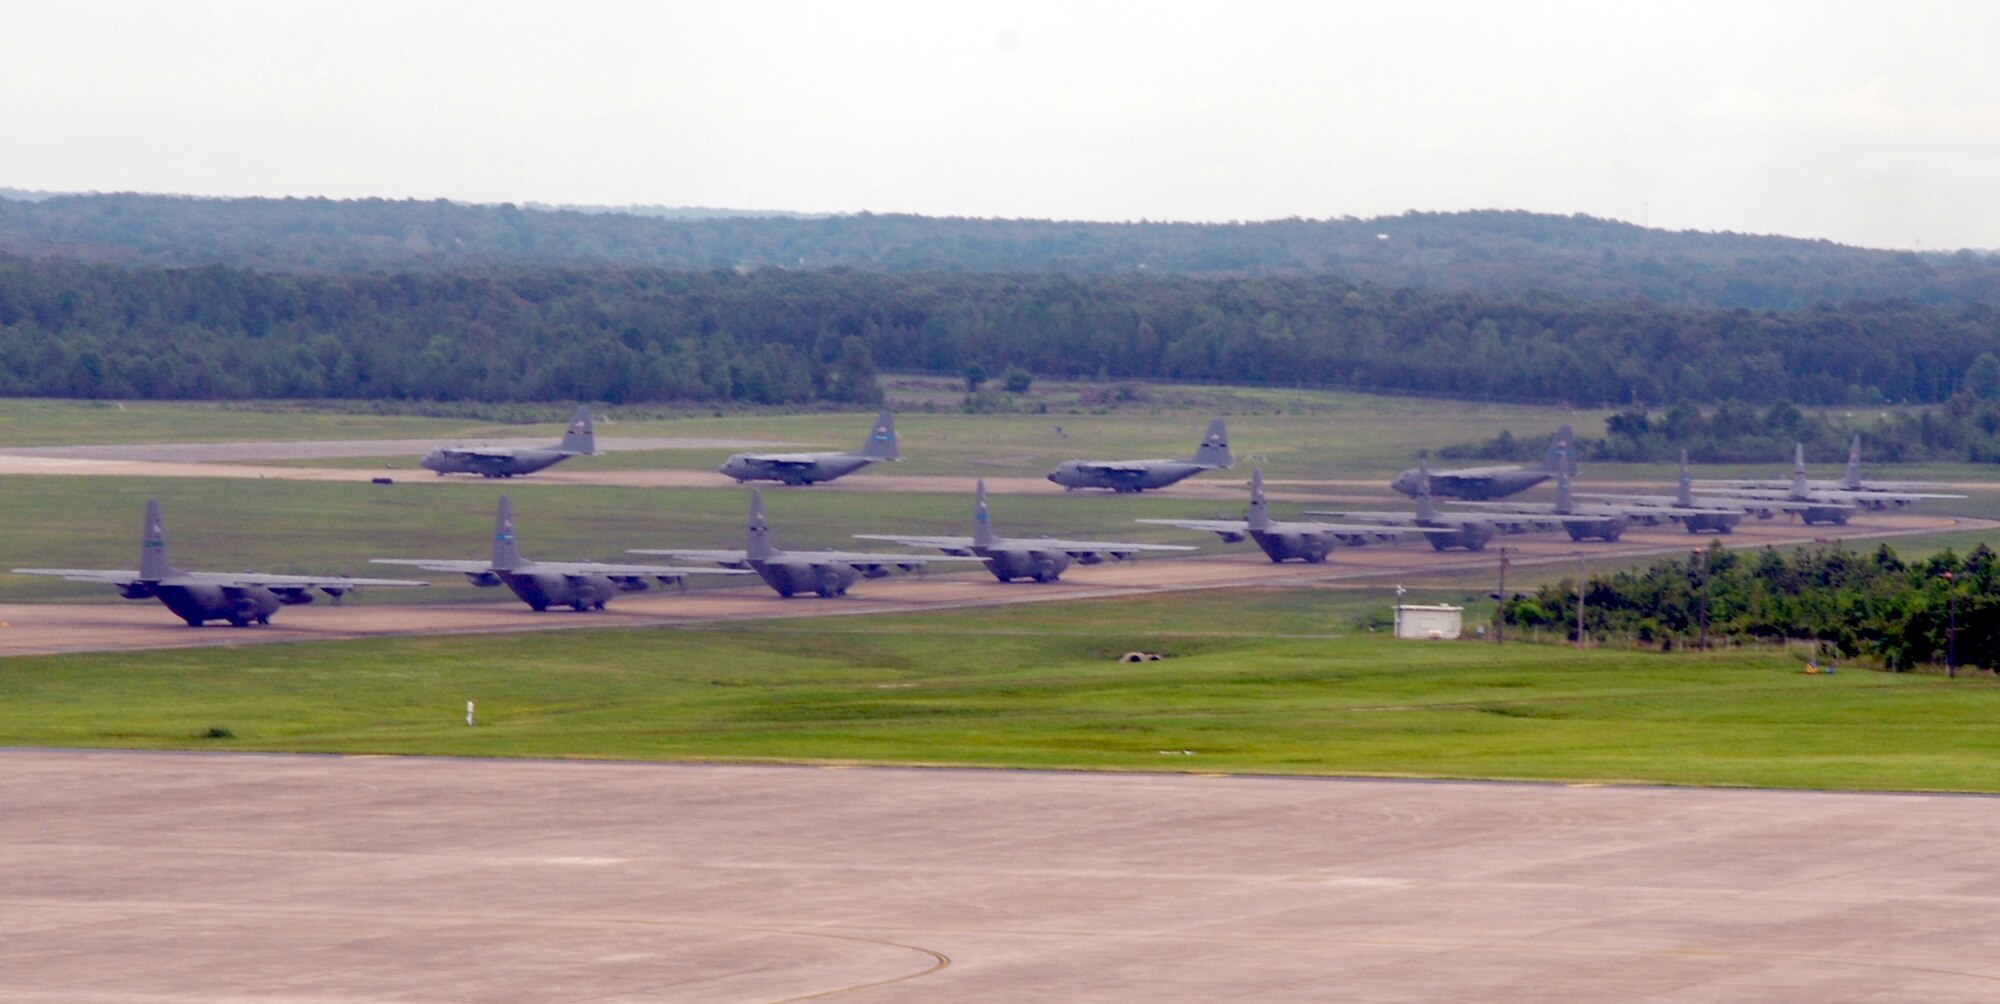 Little Rock Air Force Base C-130's taxi the flight line during an exercise May 11, 2007. Fourteen C-130's participated as part of the Air Force Weapons School syllabus for C-130 and C-17  Weapons Instructor Courses. (U.S. Air Force photo by Airman Vanessa Dale)